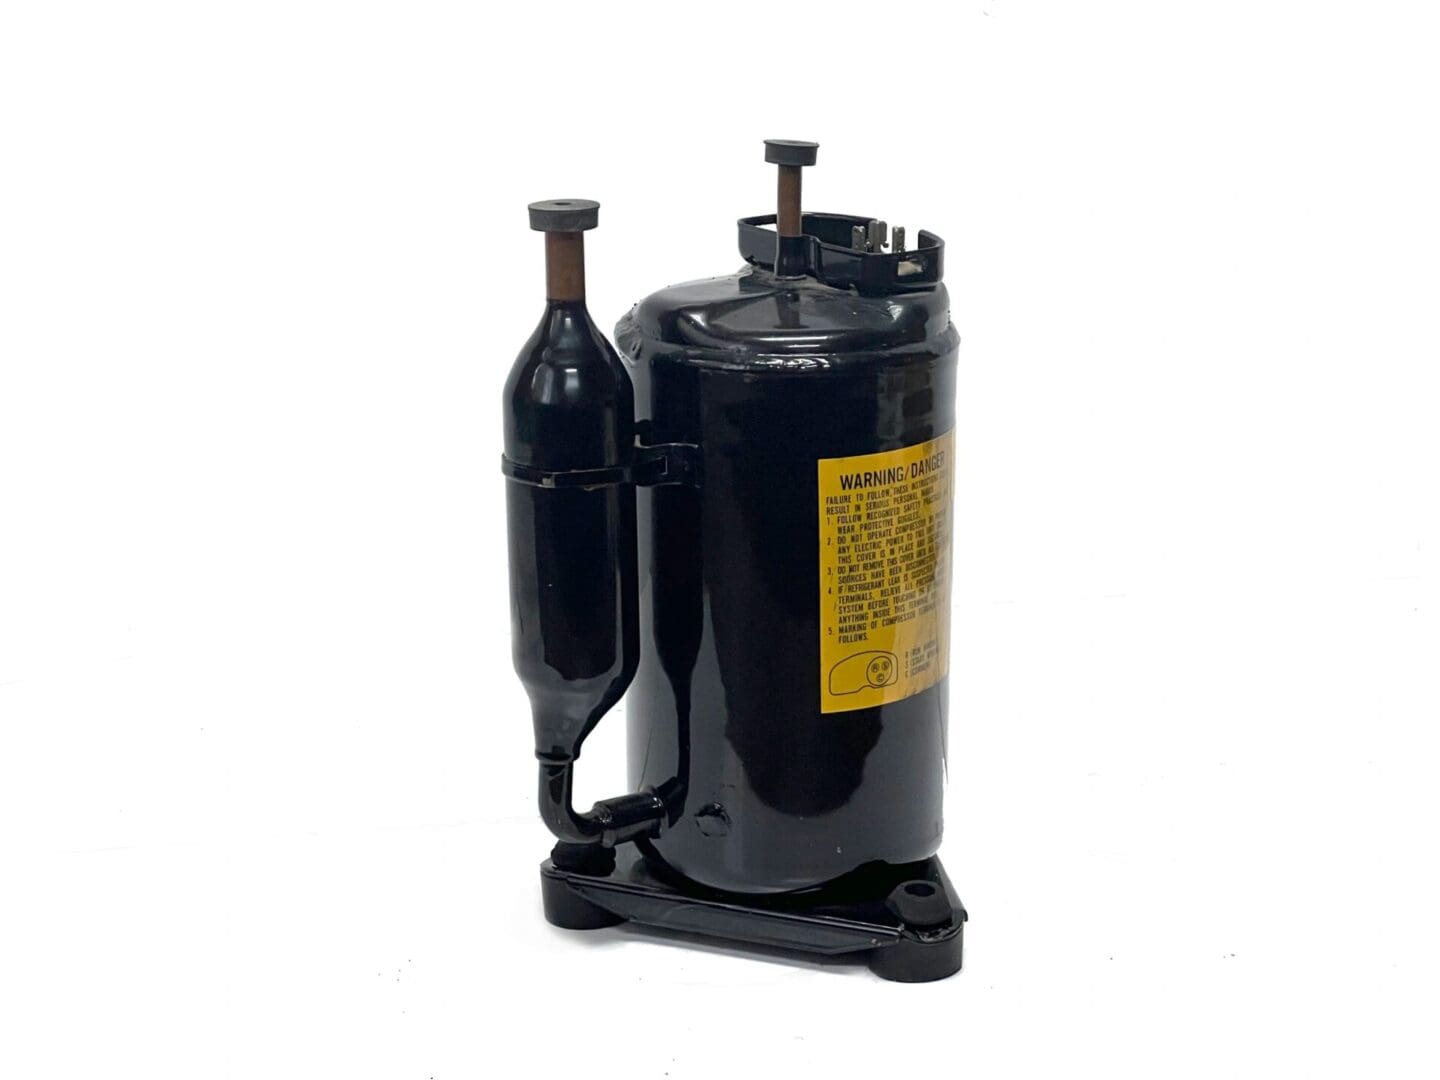 A black compressor with a yellow label on it.